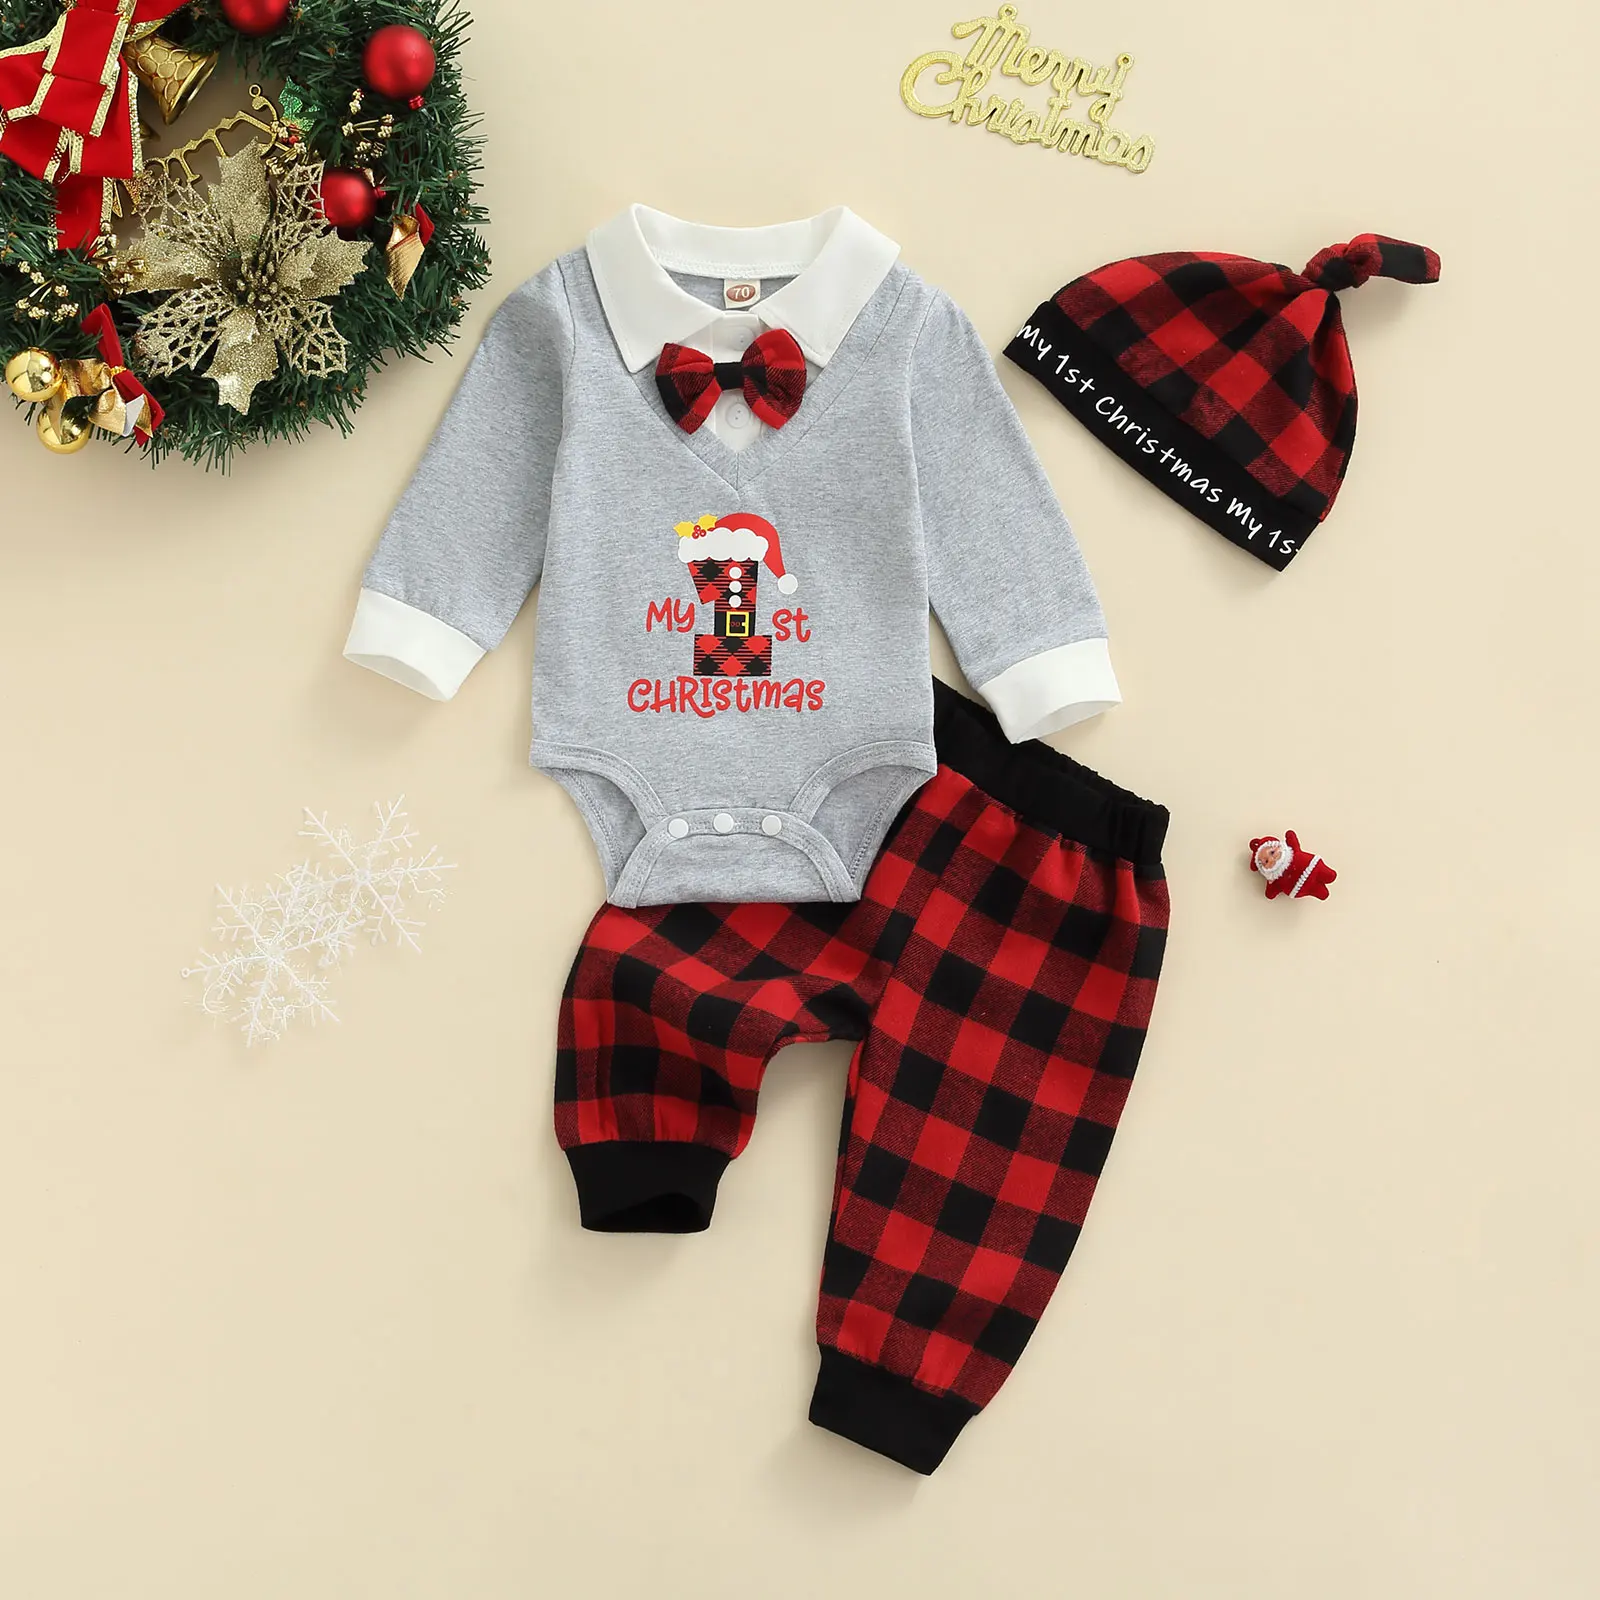 My 1st Christmas Outfit Baby Boys Girls Romper+Red Plaid Pants+Hat 3Pcs Clothes Set 0-12 Month 